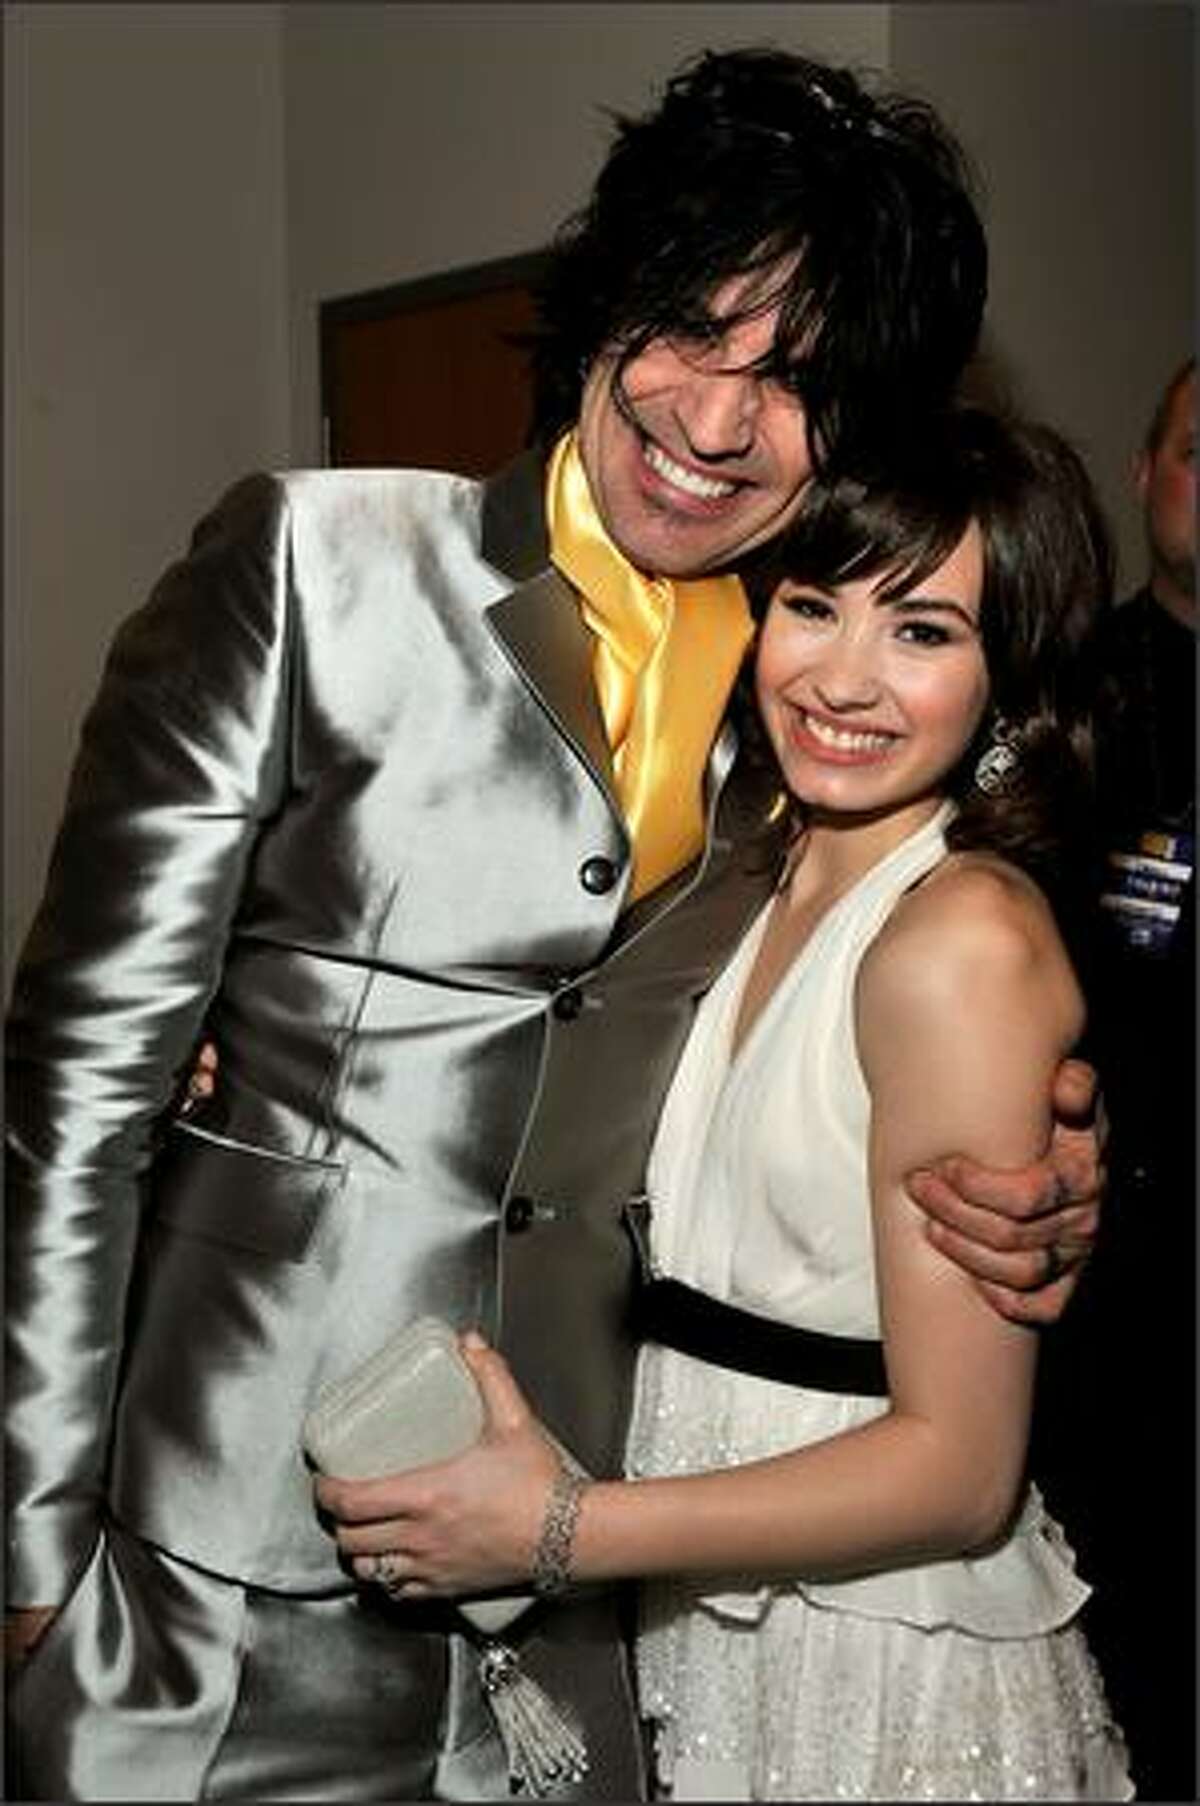 Musician Tommy Lee and actress/singer Demi Lovato pose backstage at the 2008 American Music Awards held at Nokia Theatre L.A. LIVE in Los Angeles, California.